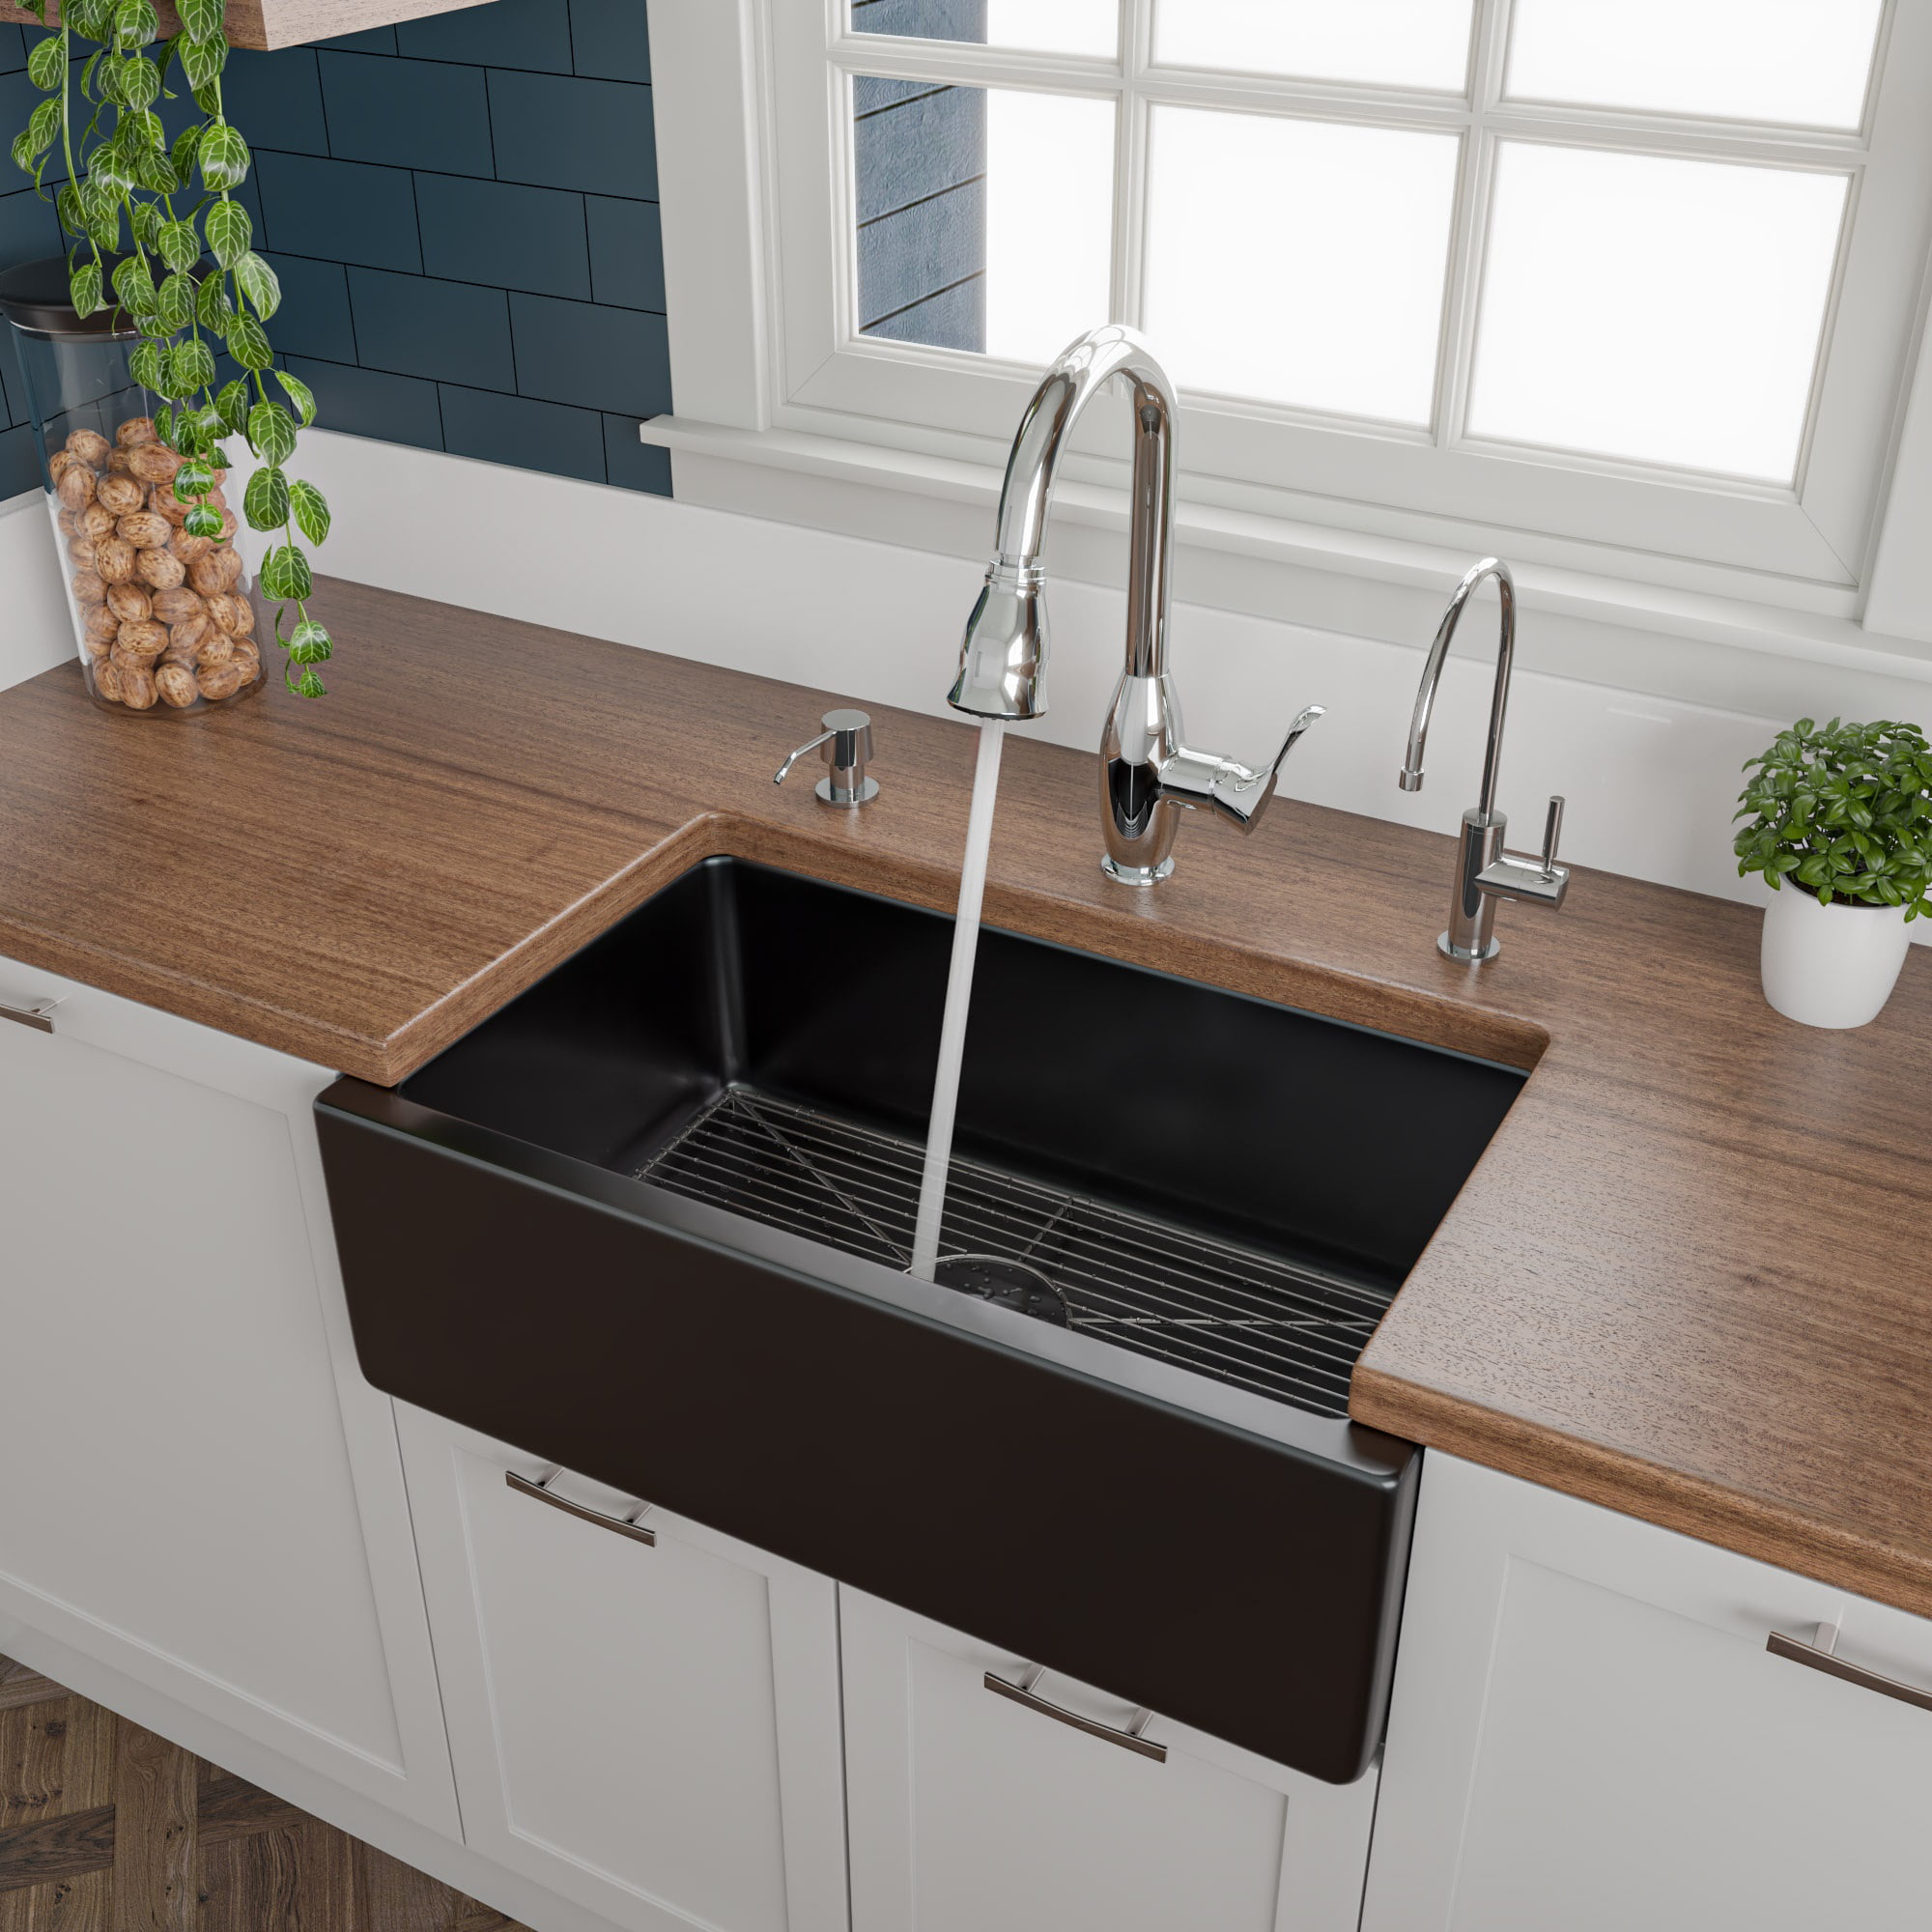 Picture of Alfi Brand AB3018HS-BG 30 in. Black Gloss Reversible Smooth & Fluted Single Bowl Fireclay Farm Sink